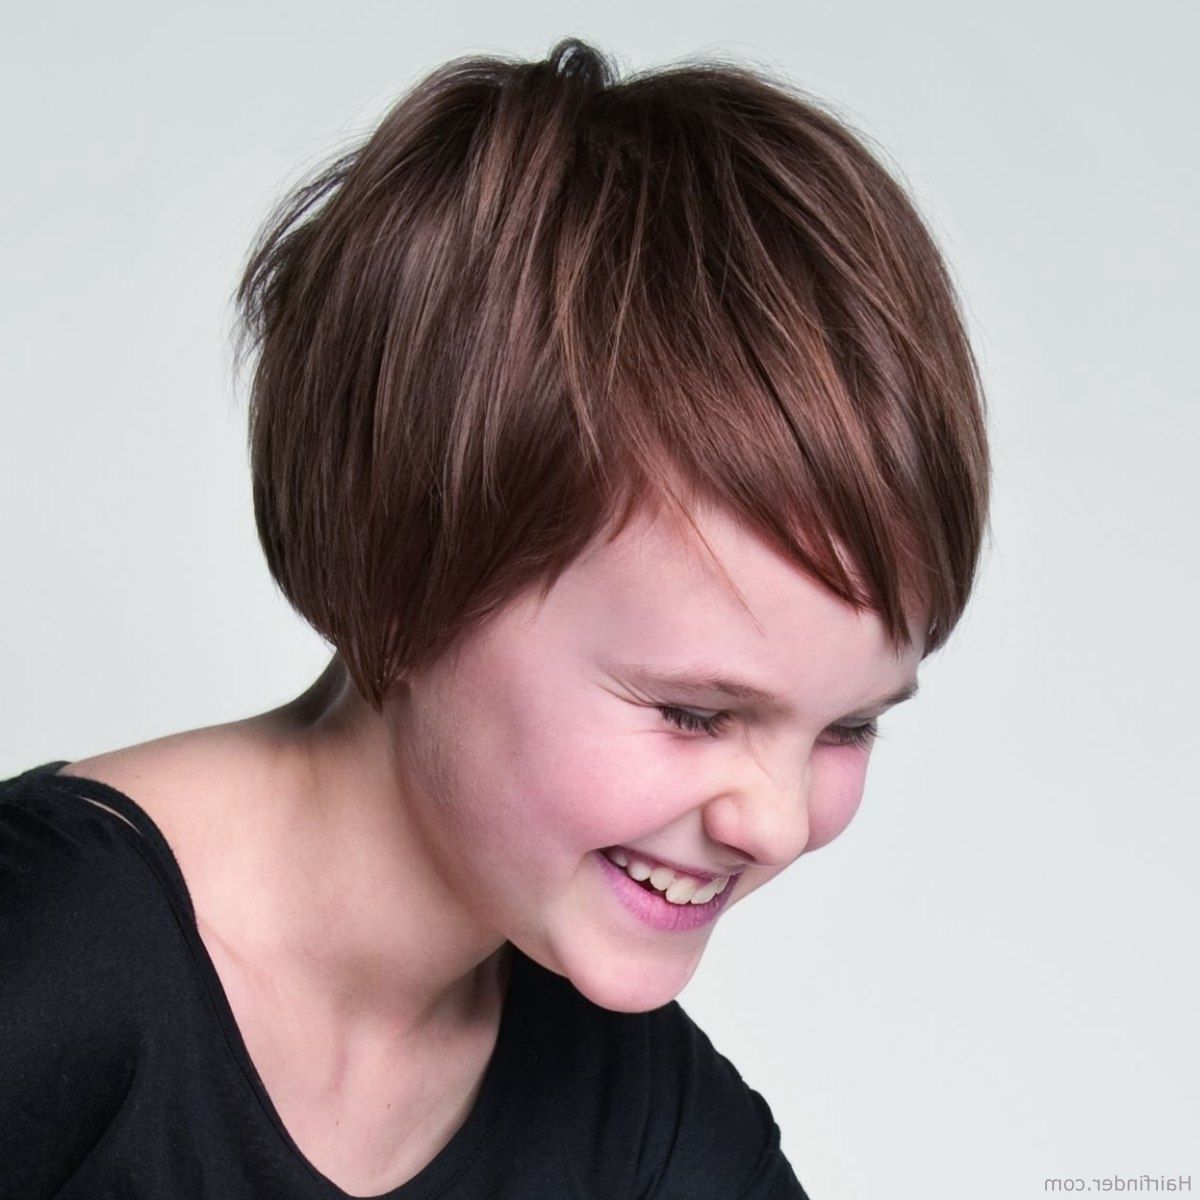 Short Easy To Care For Hair Style For Active Little Girls With Regard To Little Girl Updos For Short Hair (View 11 of 15)